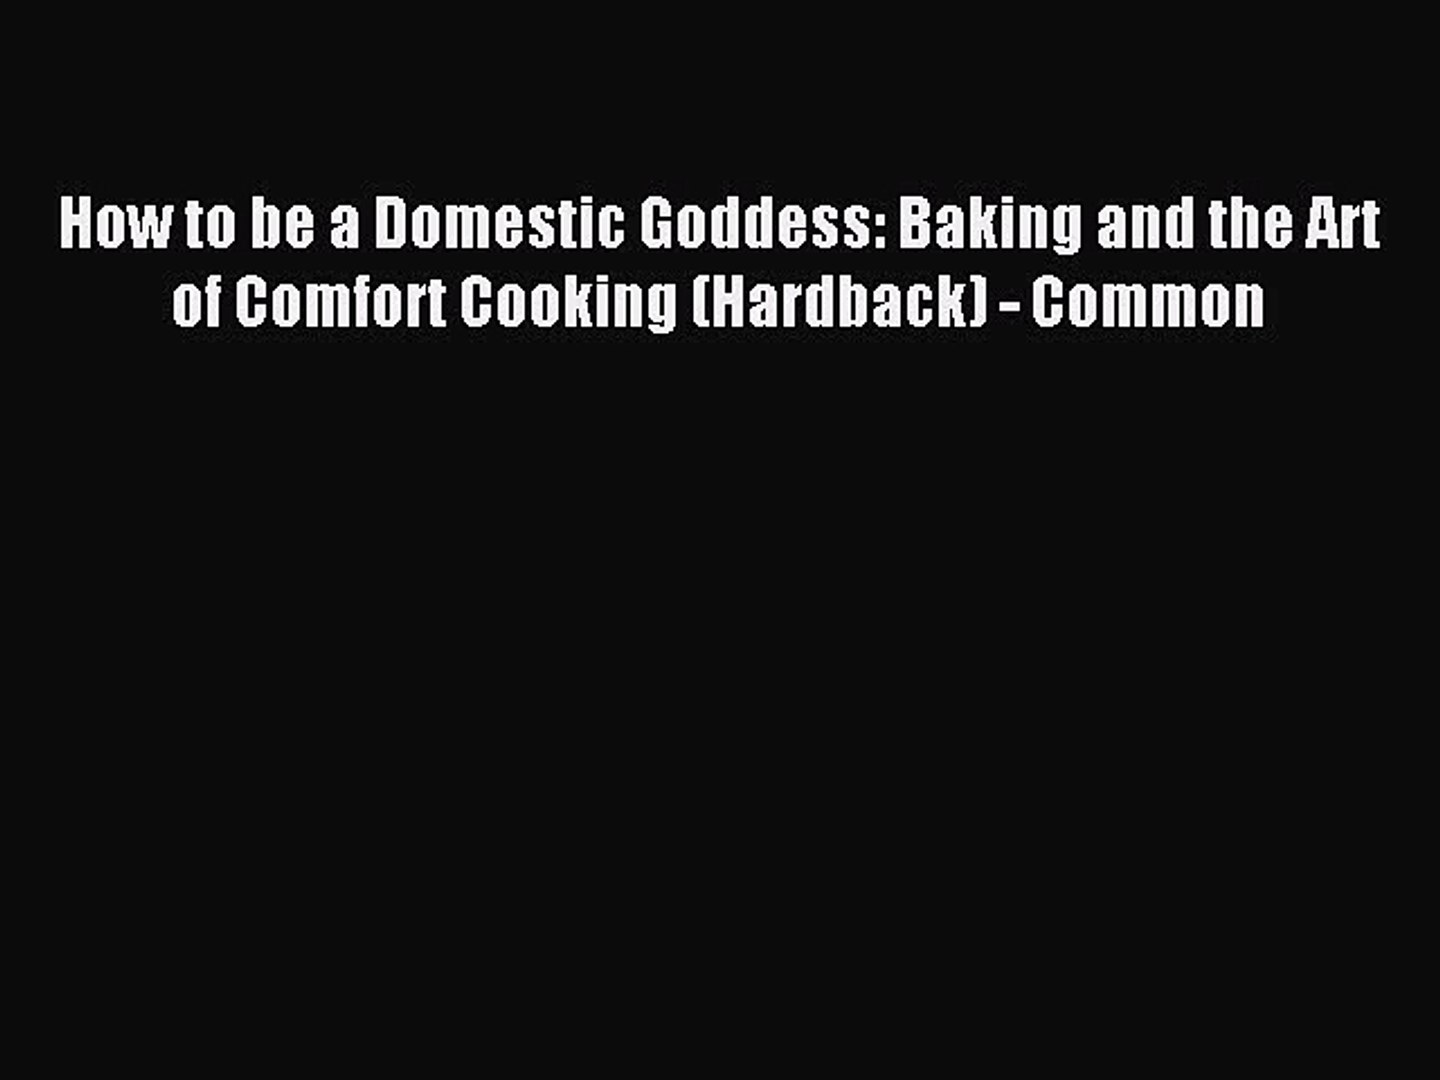 ⁣Read How to be a Domestic Goddess: Baking and the Art of Comfort Cooking (Hardback) - Common